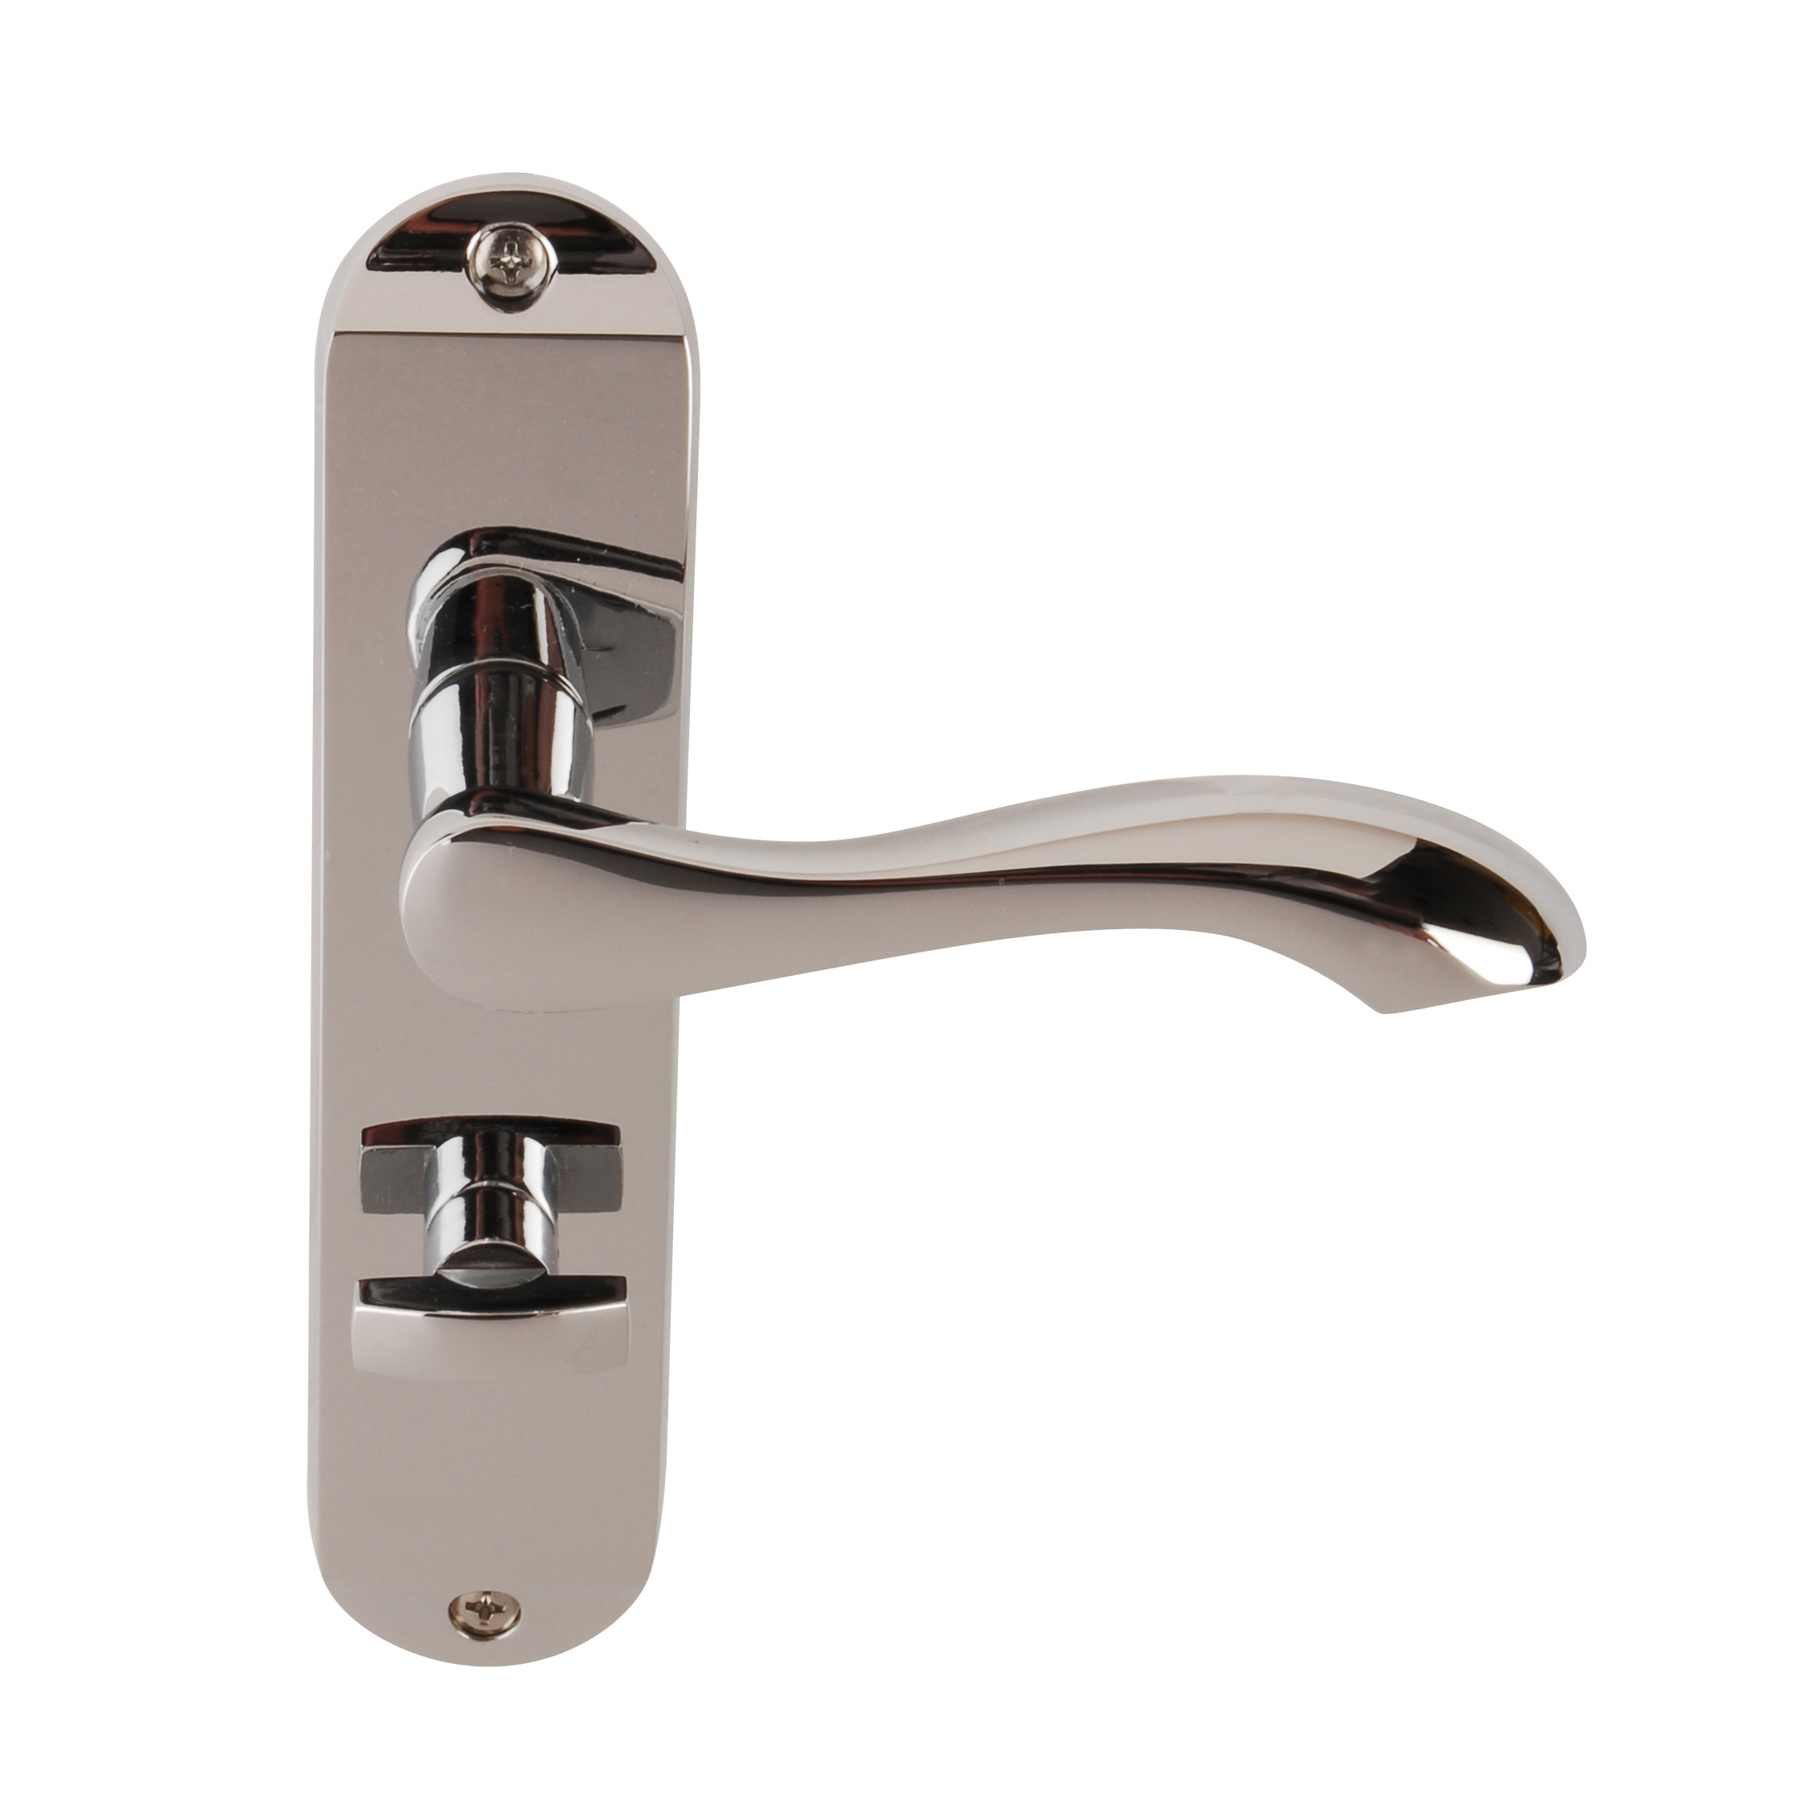 DOOR HANDLES BATHROOM STRETTON CLAM POLISHED CHROME PLATED REF DH058942 DALE